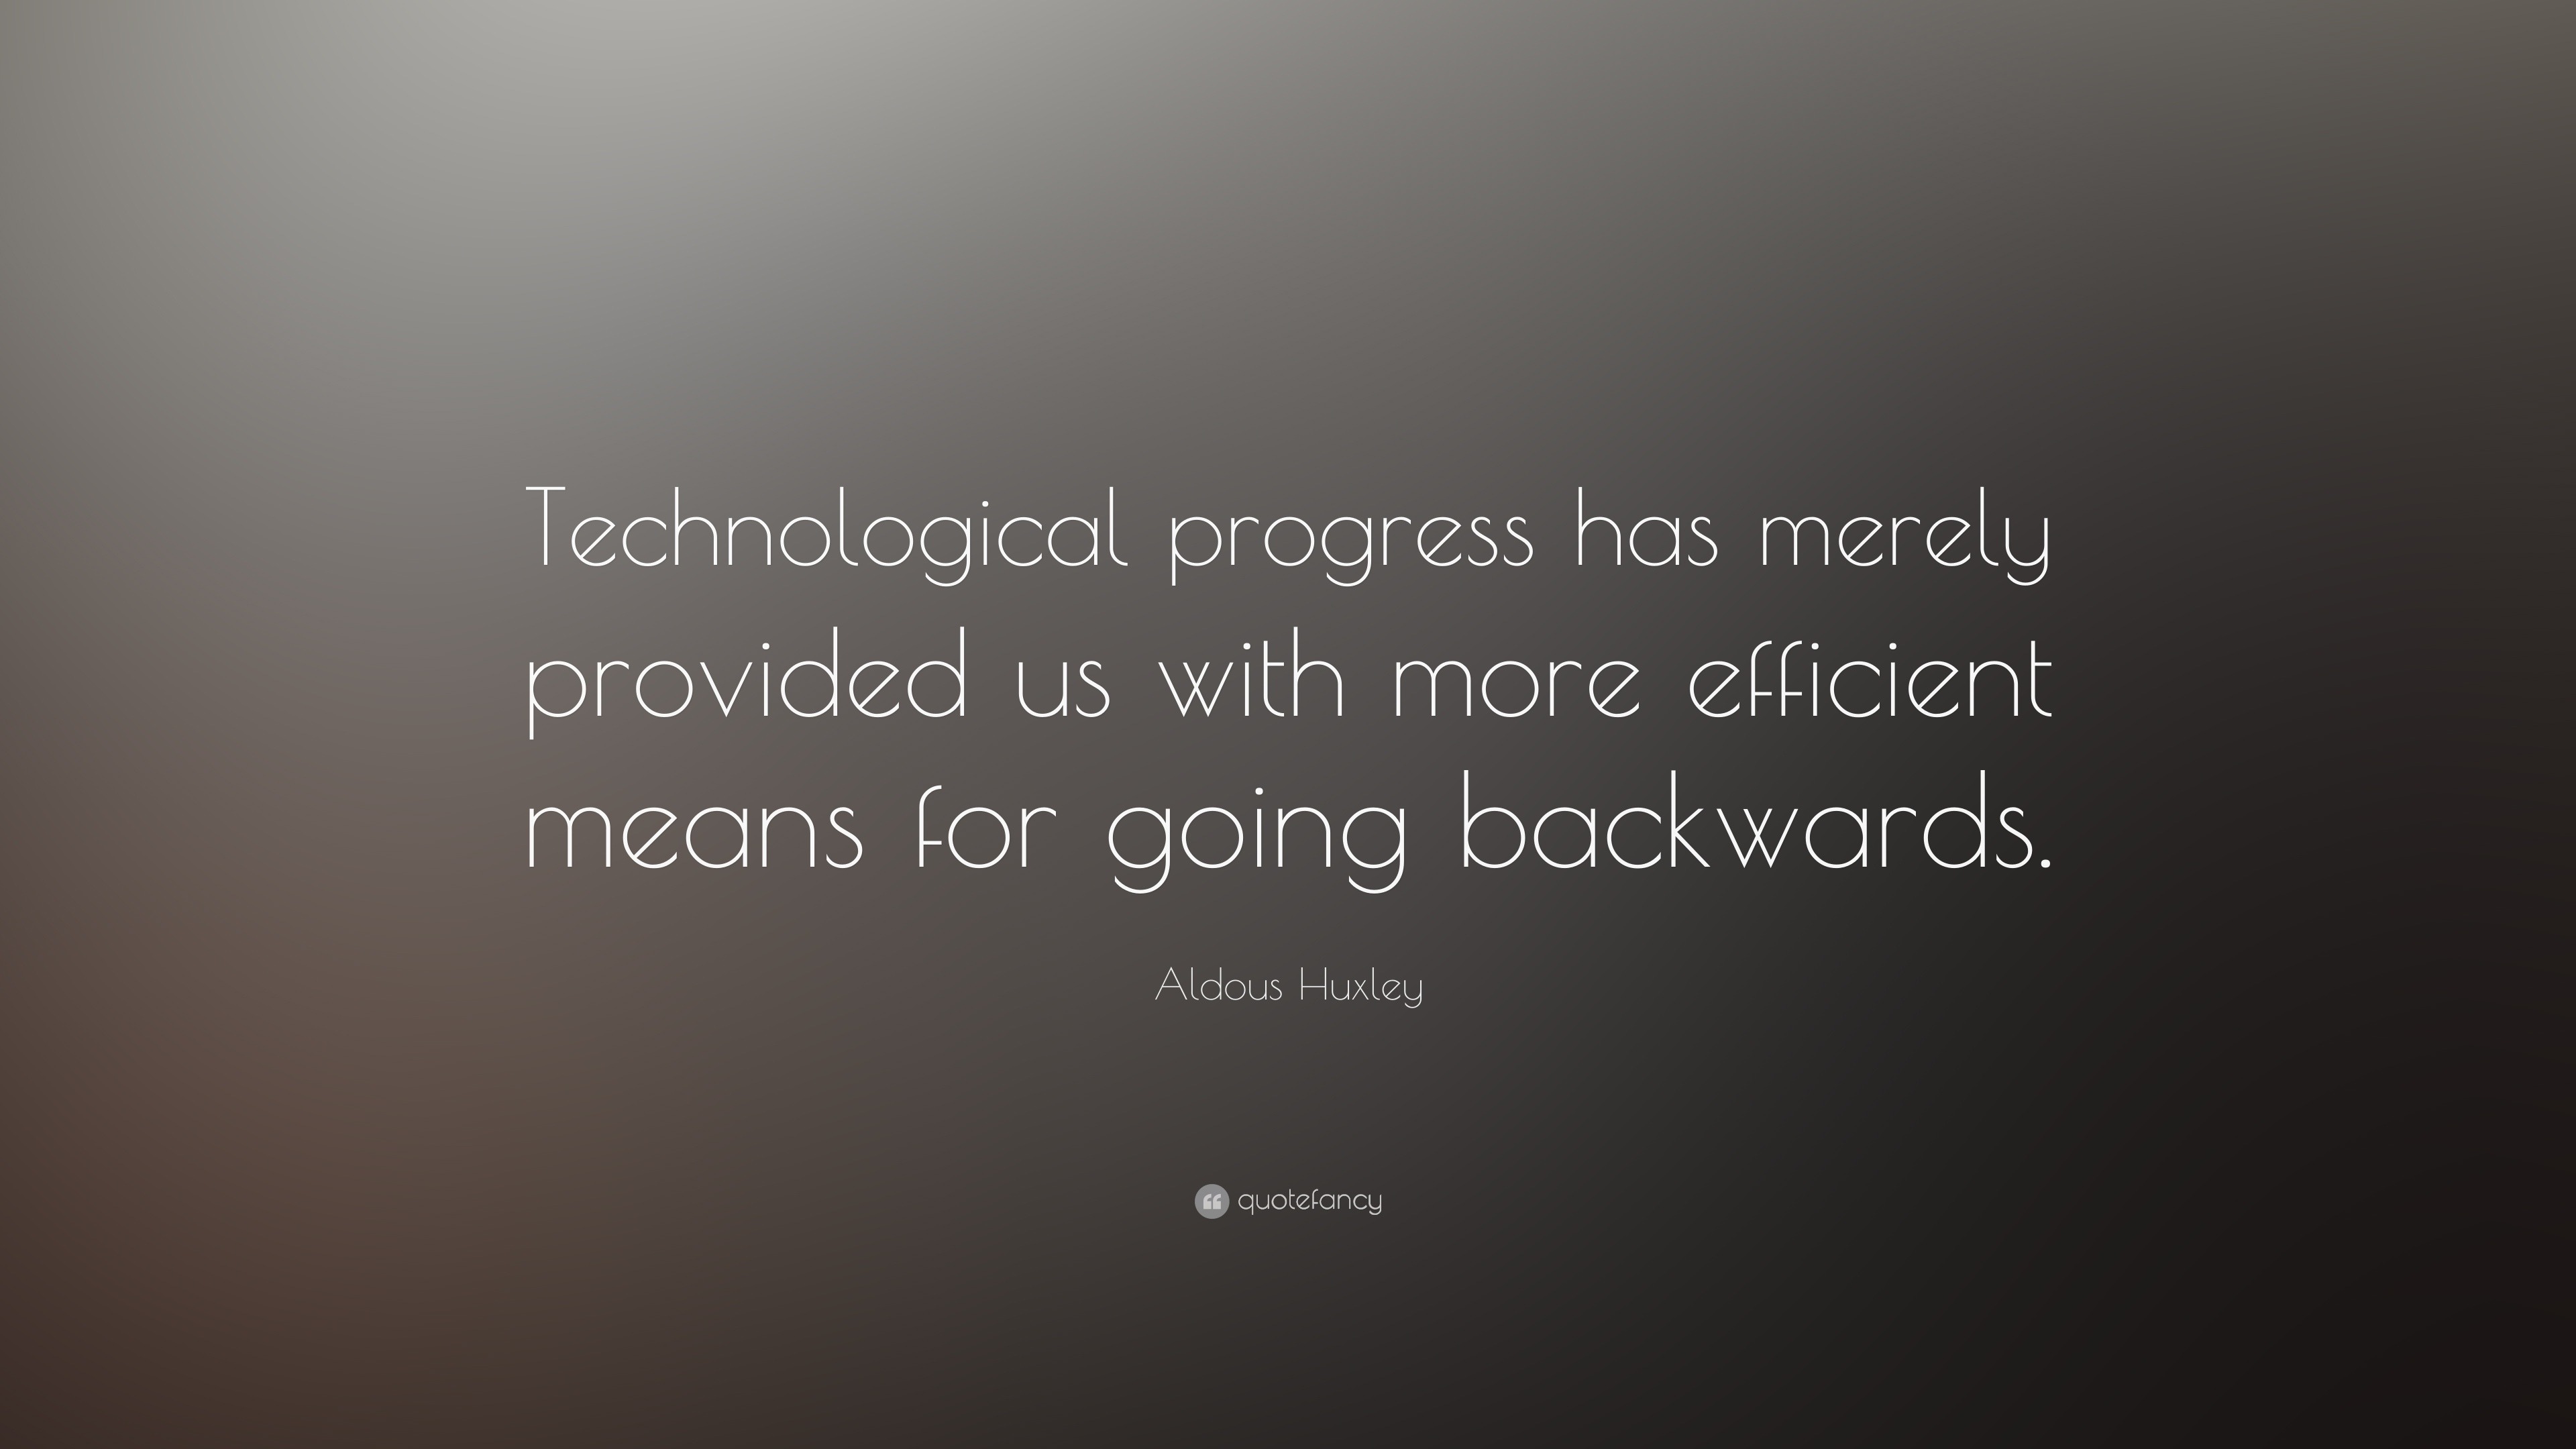 Aldous Huxley Quote: “Technological progress has merely provided us ...